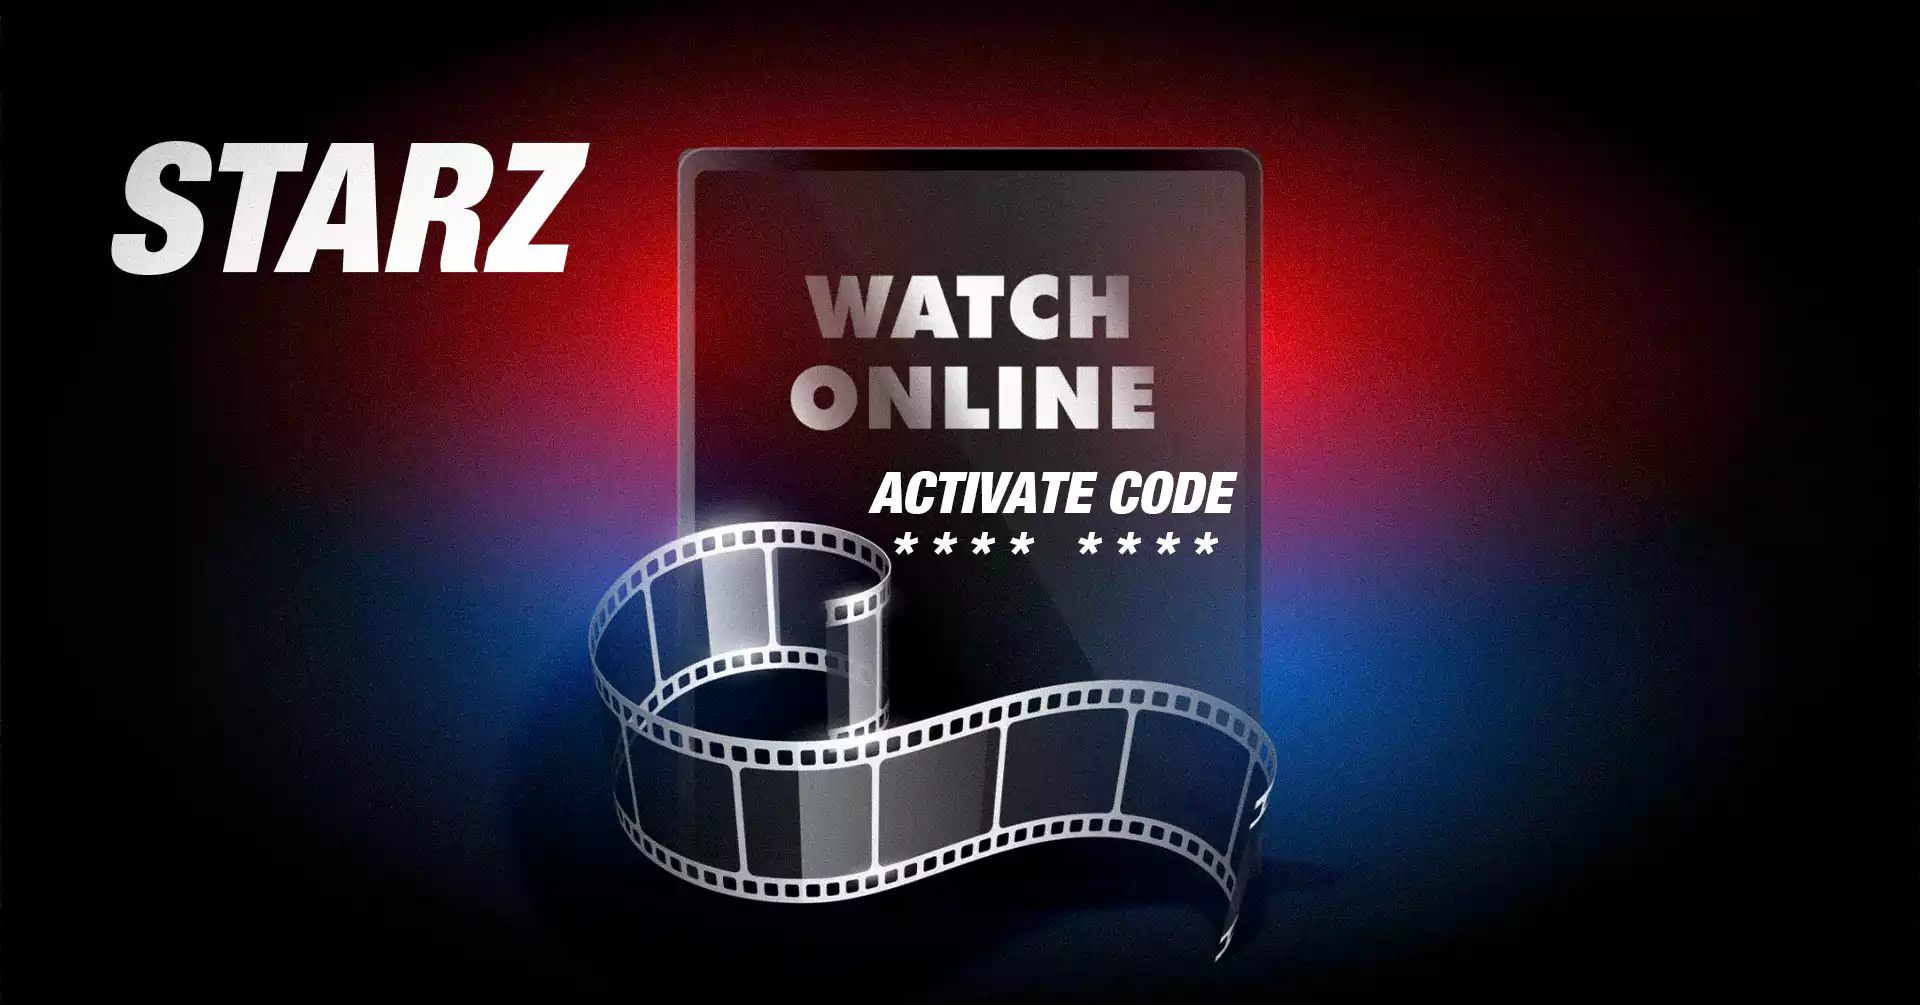 activate code image for www.starz.com/activate